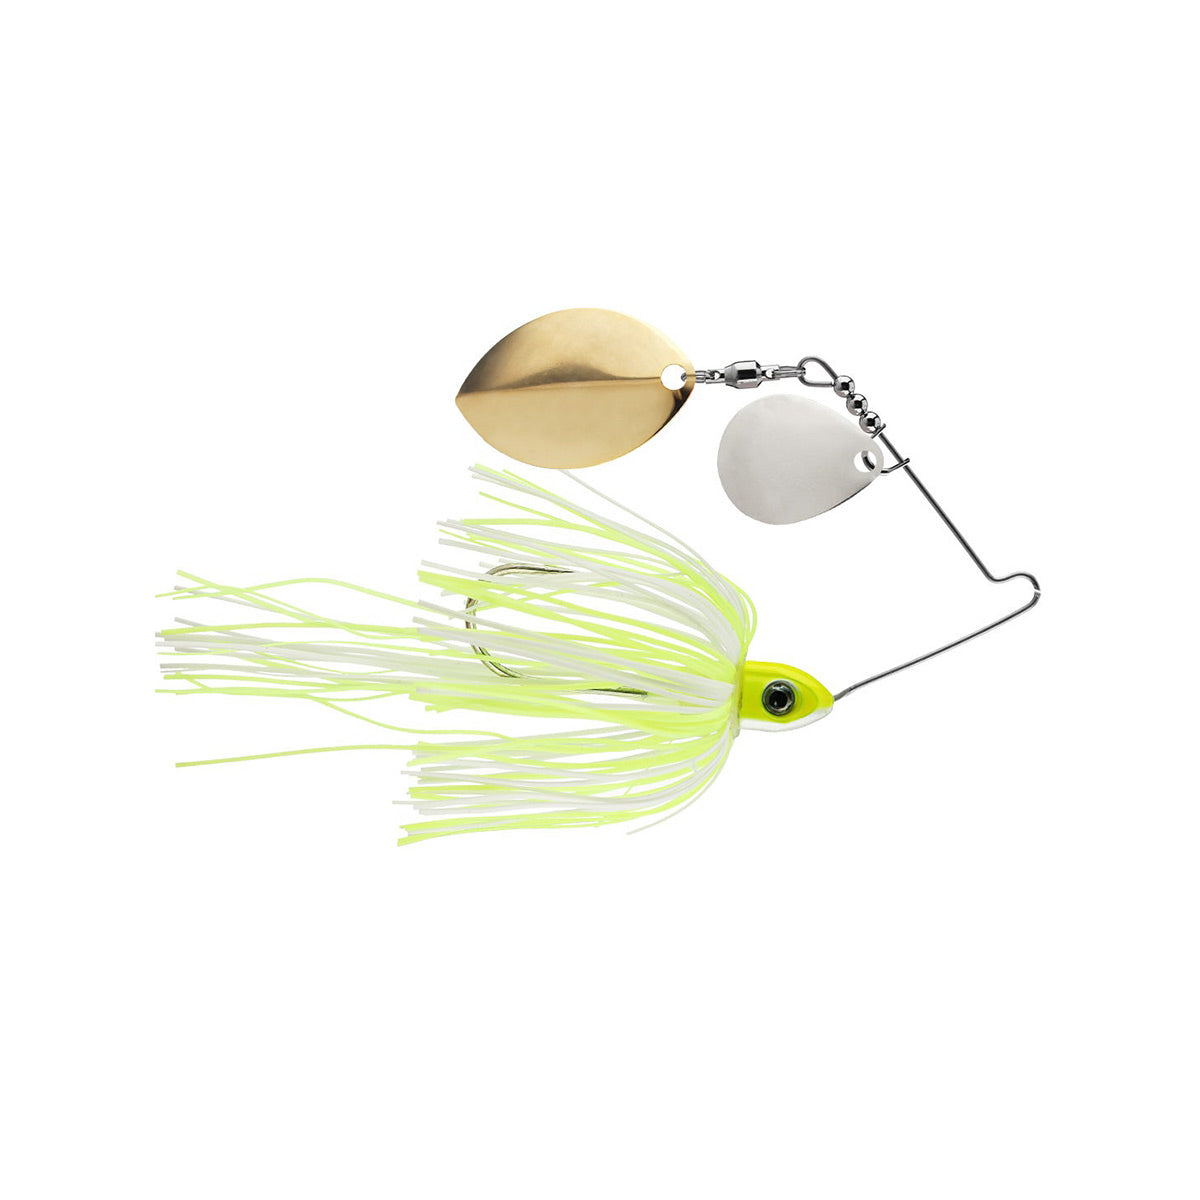 Rapid Fire Double Willow Spinnerbait_Hot Chartreuse White - Nickel/Gold